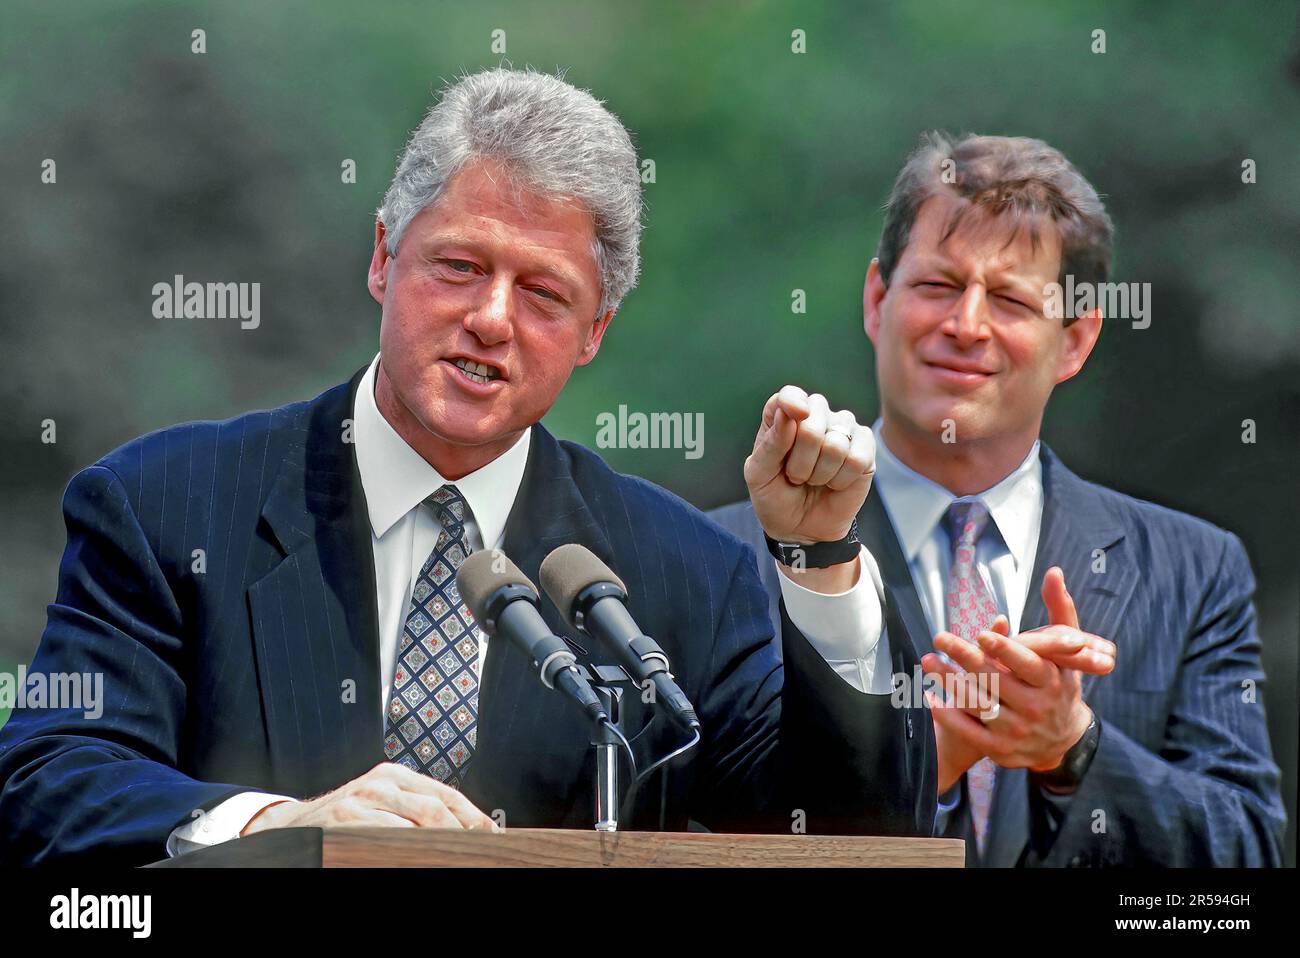 WASHINGTON DC - AUGUST 10, 1993 President William Jefferson Clinton and Vice President Albert Gore Jr. address the crowd gathered on the South Lawn of the White House to witness the signing of the Budget deficit bill signing. Clinton signed the Omnibus Budget Reconciliation Act of 1993 which passed Congress without a single Republican vote. It raised taxes on the wealthiest 1.2% of taxpayers, while cutting taxes on 15 million low-income families Stock Photo